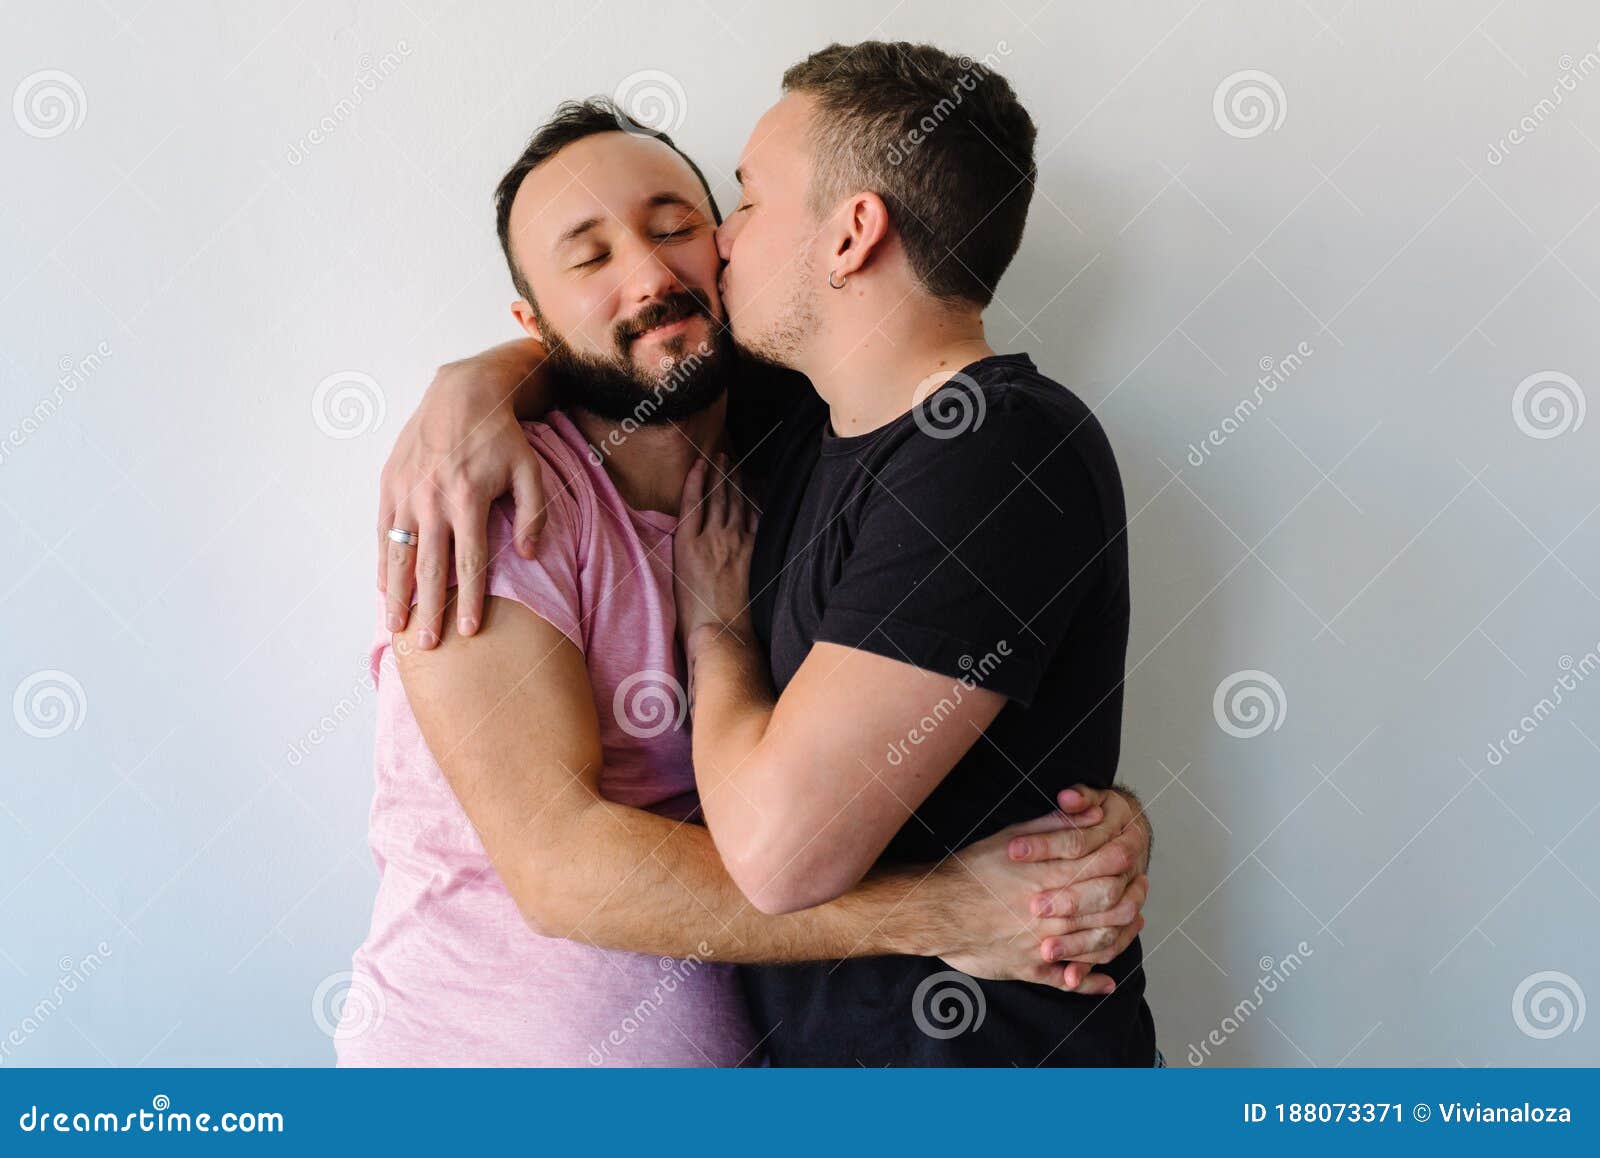 stock-photo-two-caucasian-homosexual-men-kissing-their-apartment-one-them-hugging-other-behind-gay-man-each-188073371.jpg